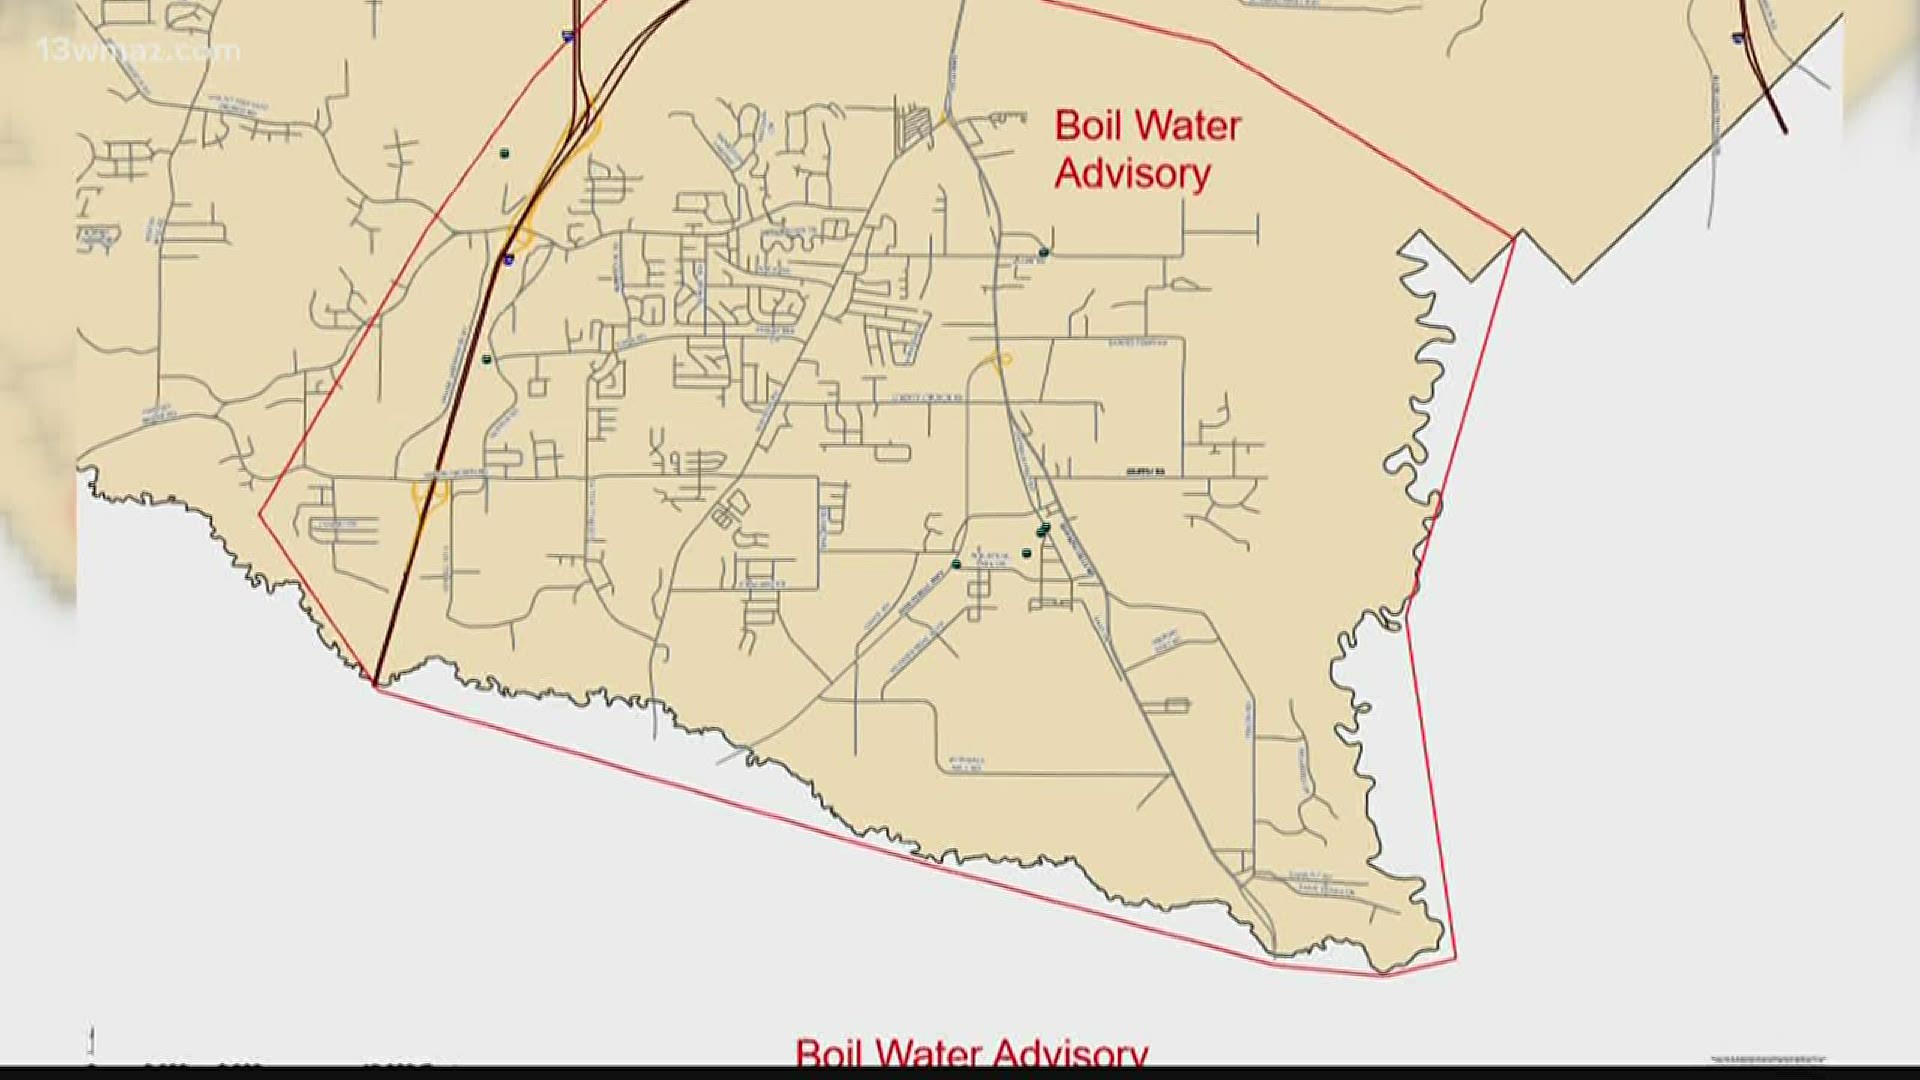 Macon Water Authority has issued a boil water advisory for customers in the southern part of the county after a water main break Thursday morning